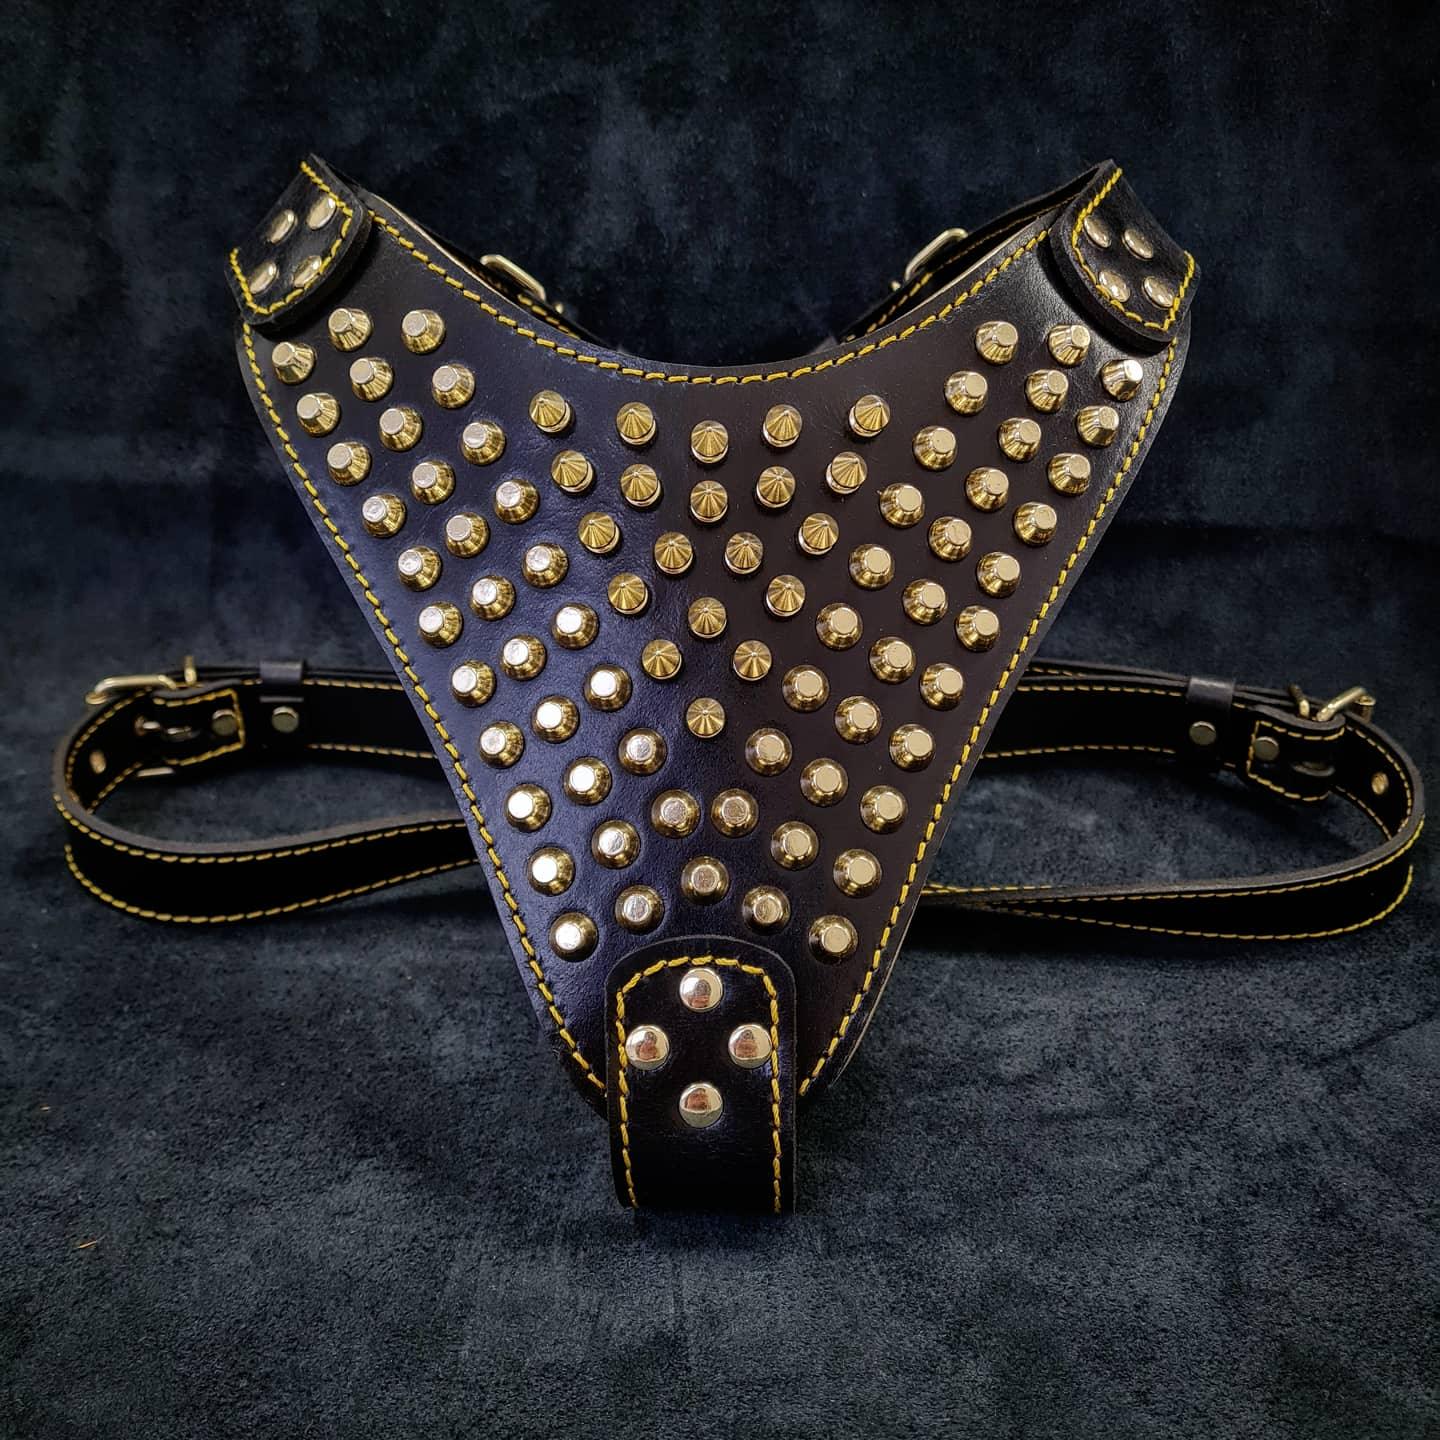 Bestia genuine leather chest plate harnesses for large dog breeds